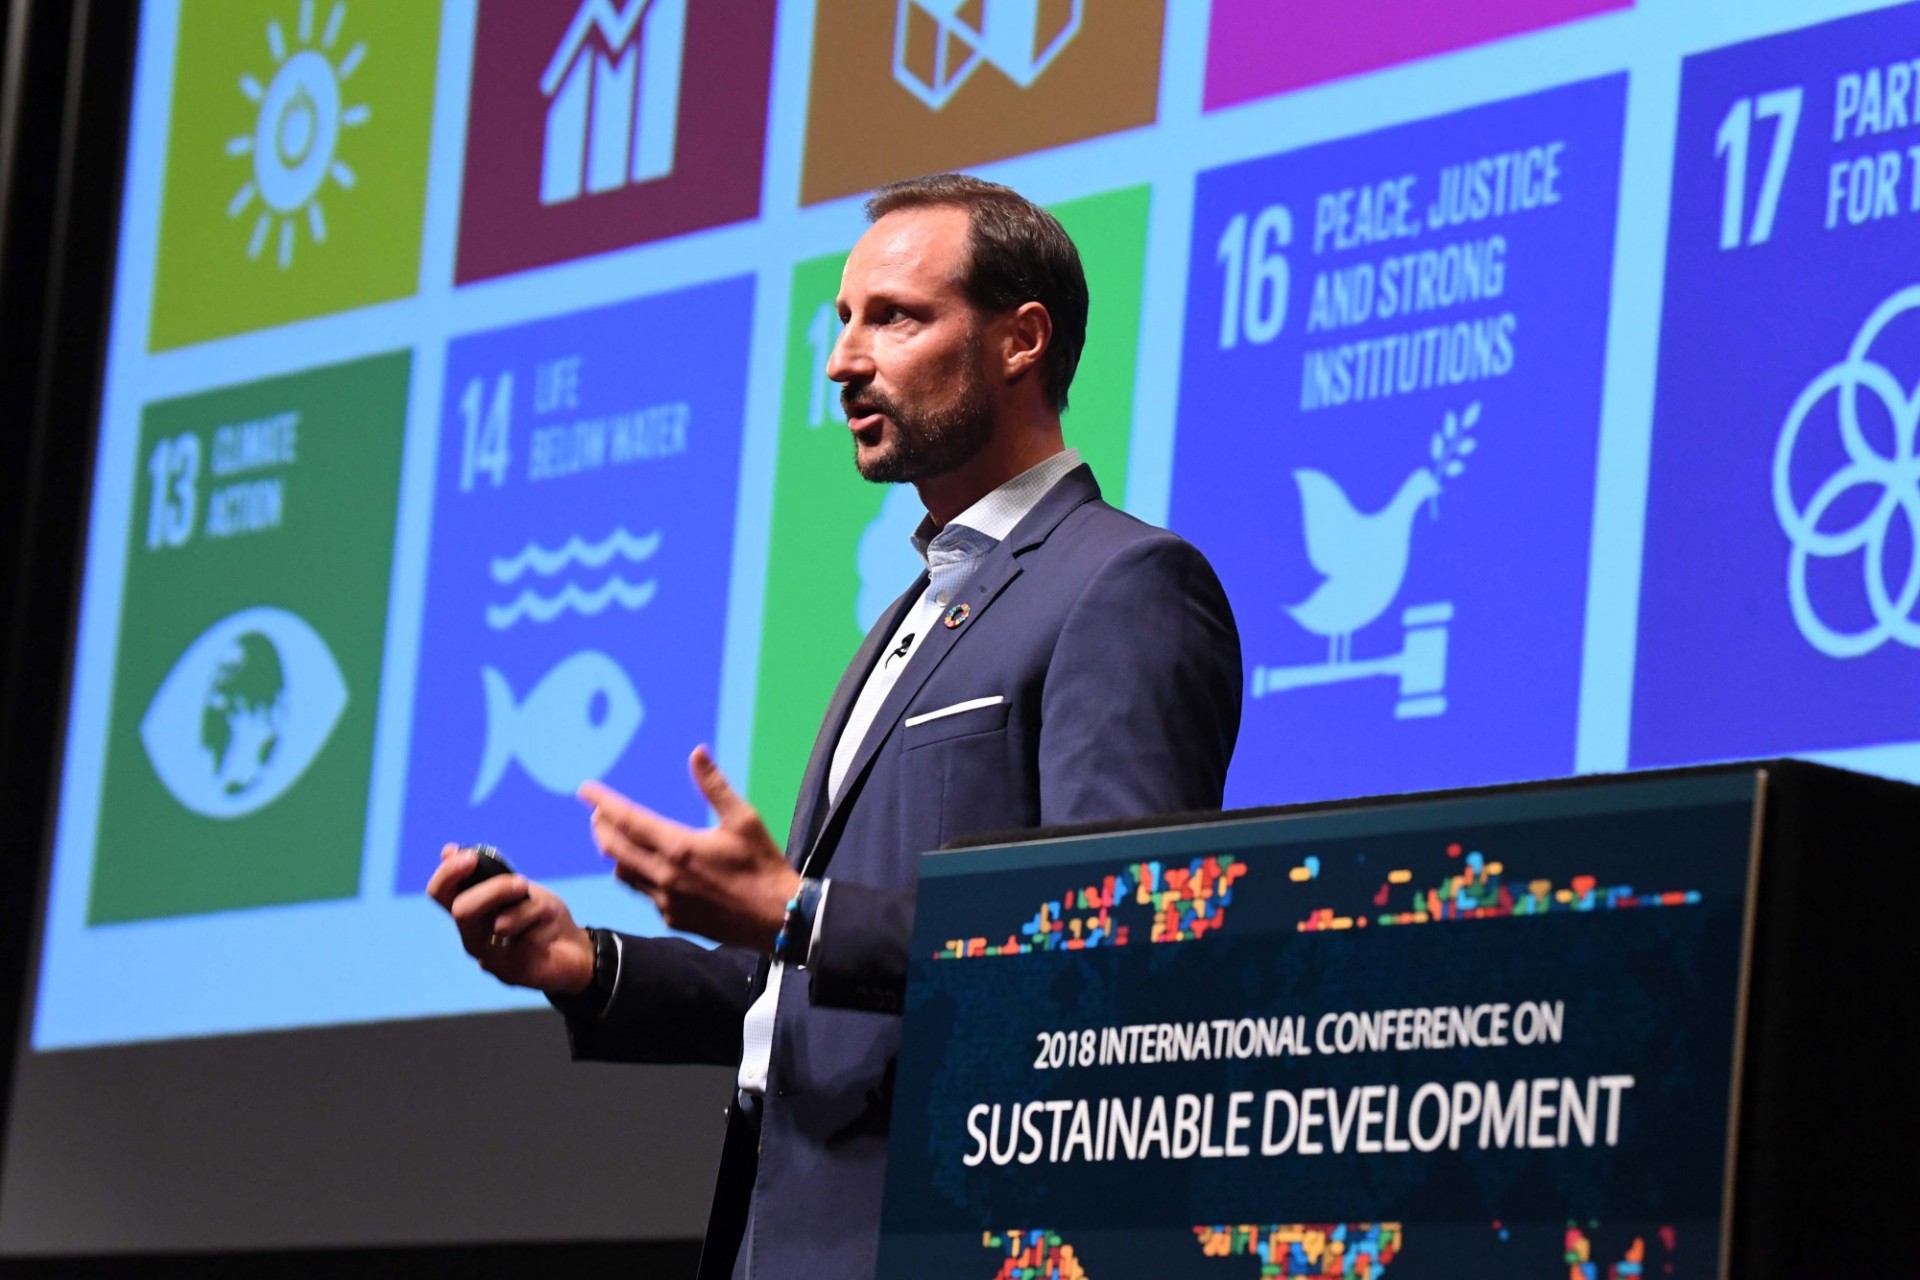 His Royal Highness Crown Prince Haakon of Norway, delivers his address to Columbia University students, faculty and staff.